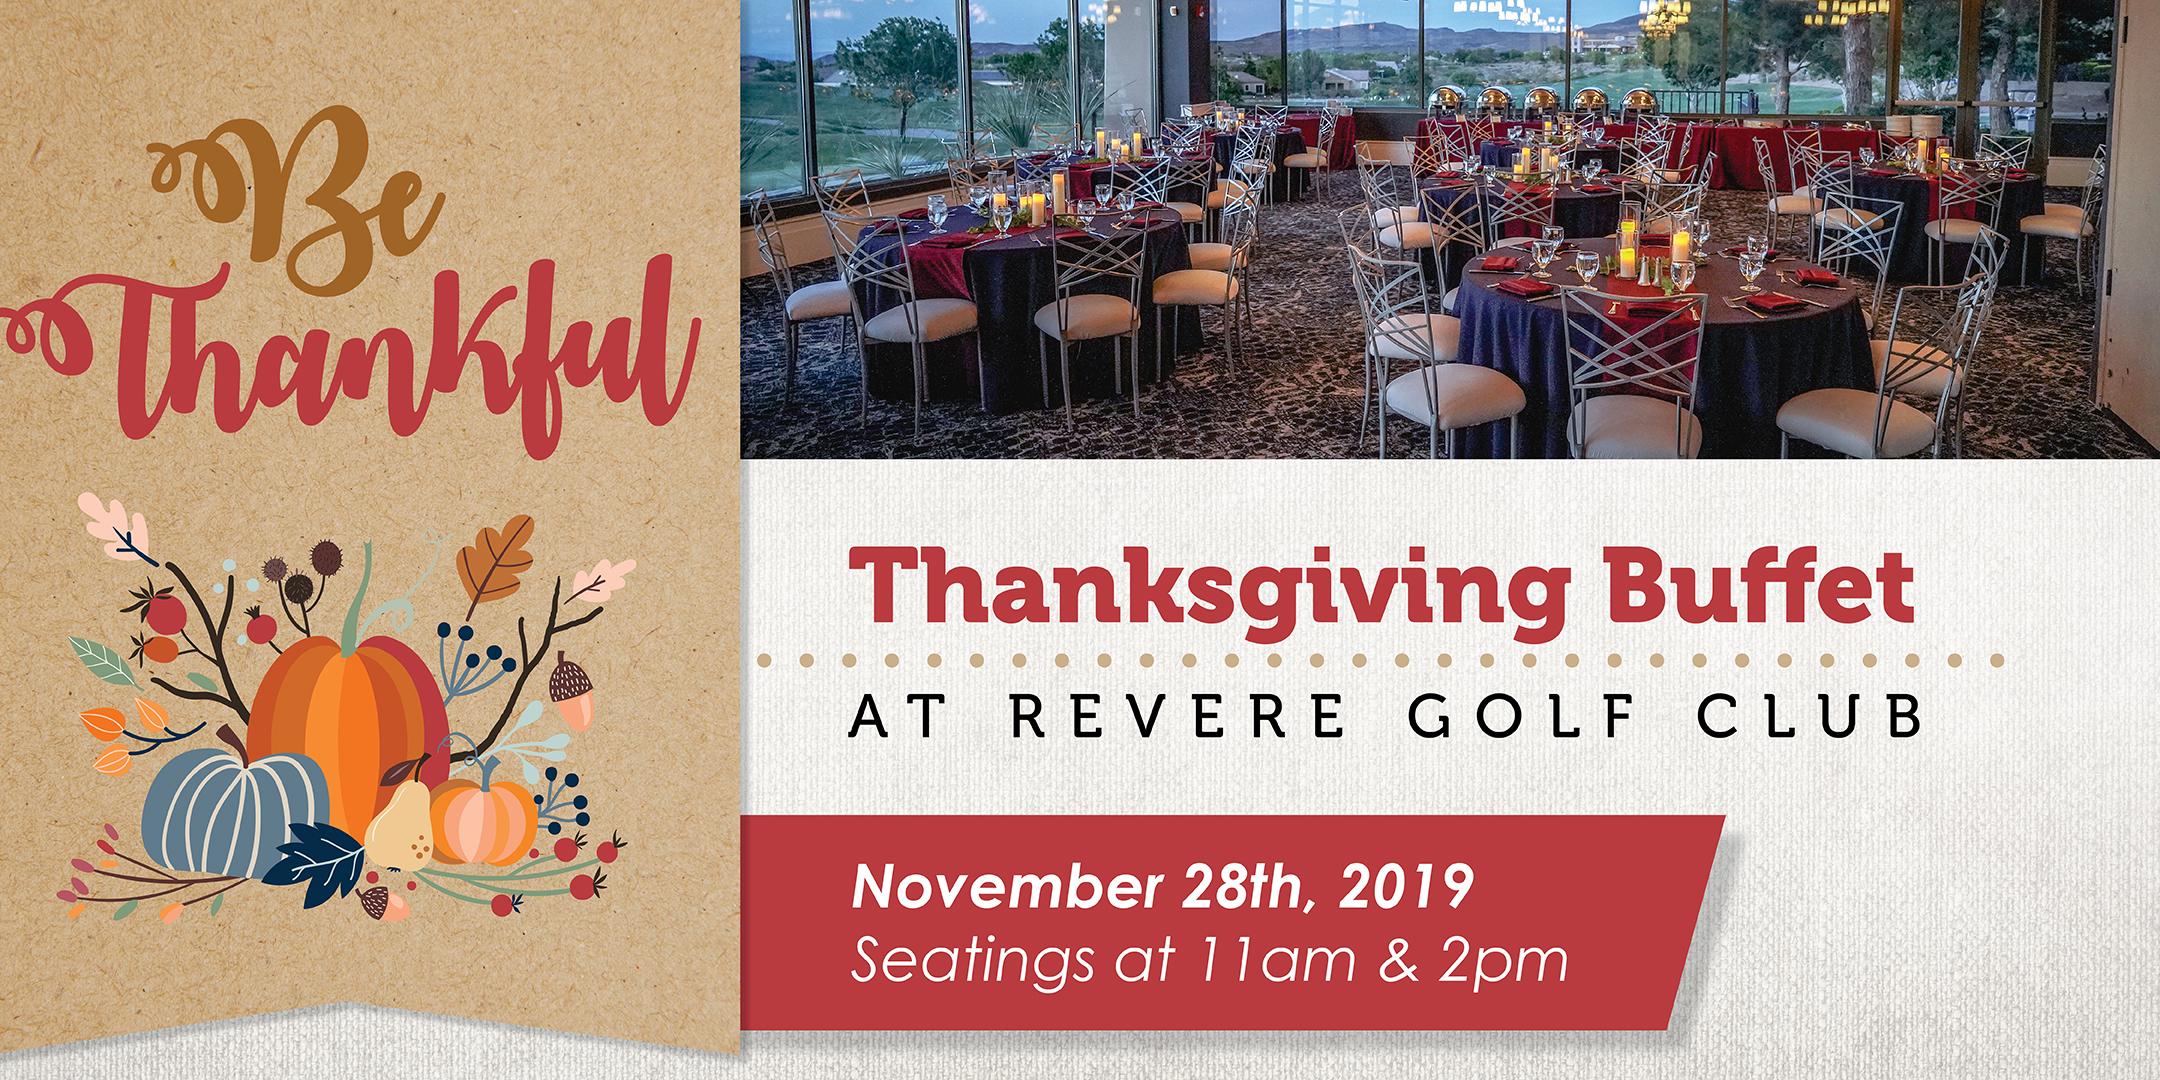 Thanksgiving Buffet at The Revere Golf Club